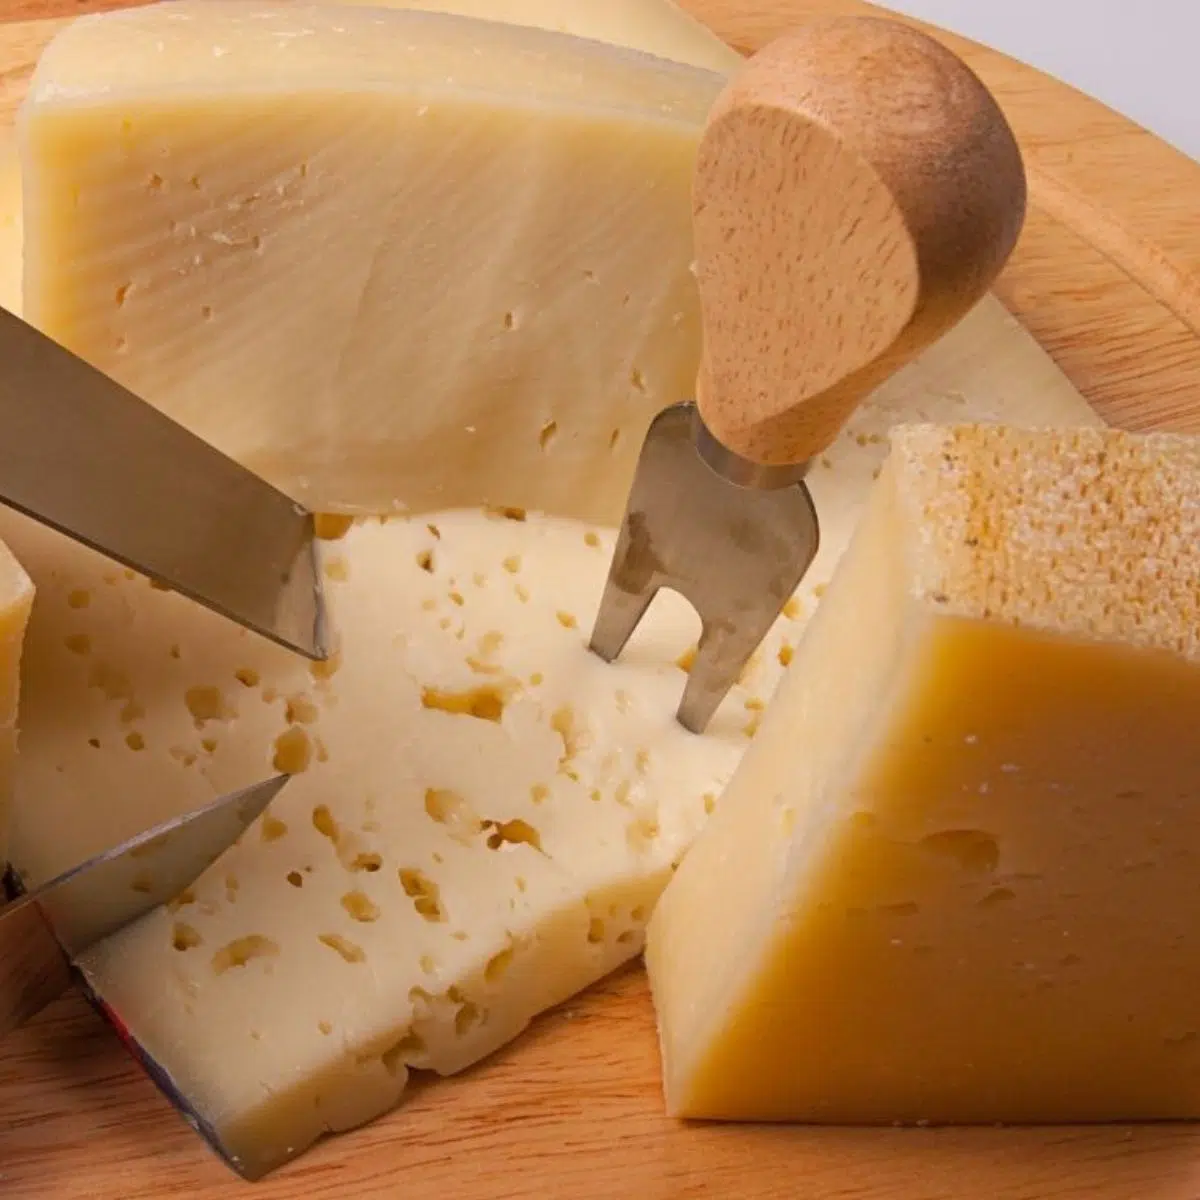 Most popular Italian cheese types showing 4 types of cheese on cheese board.